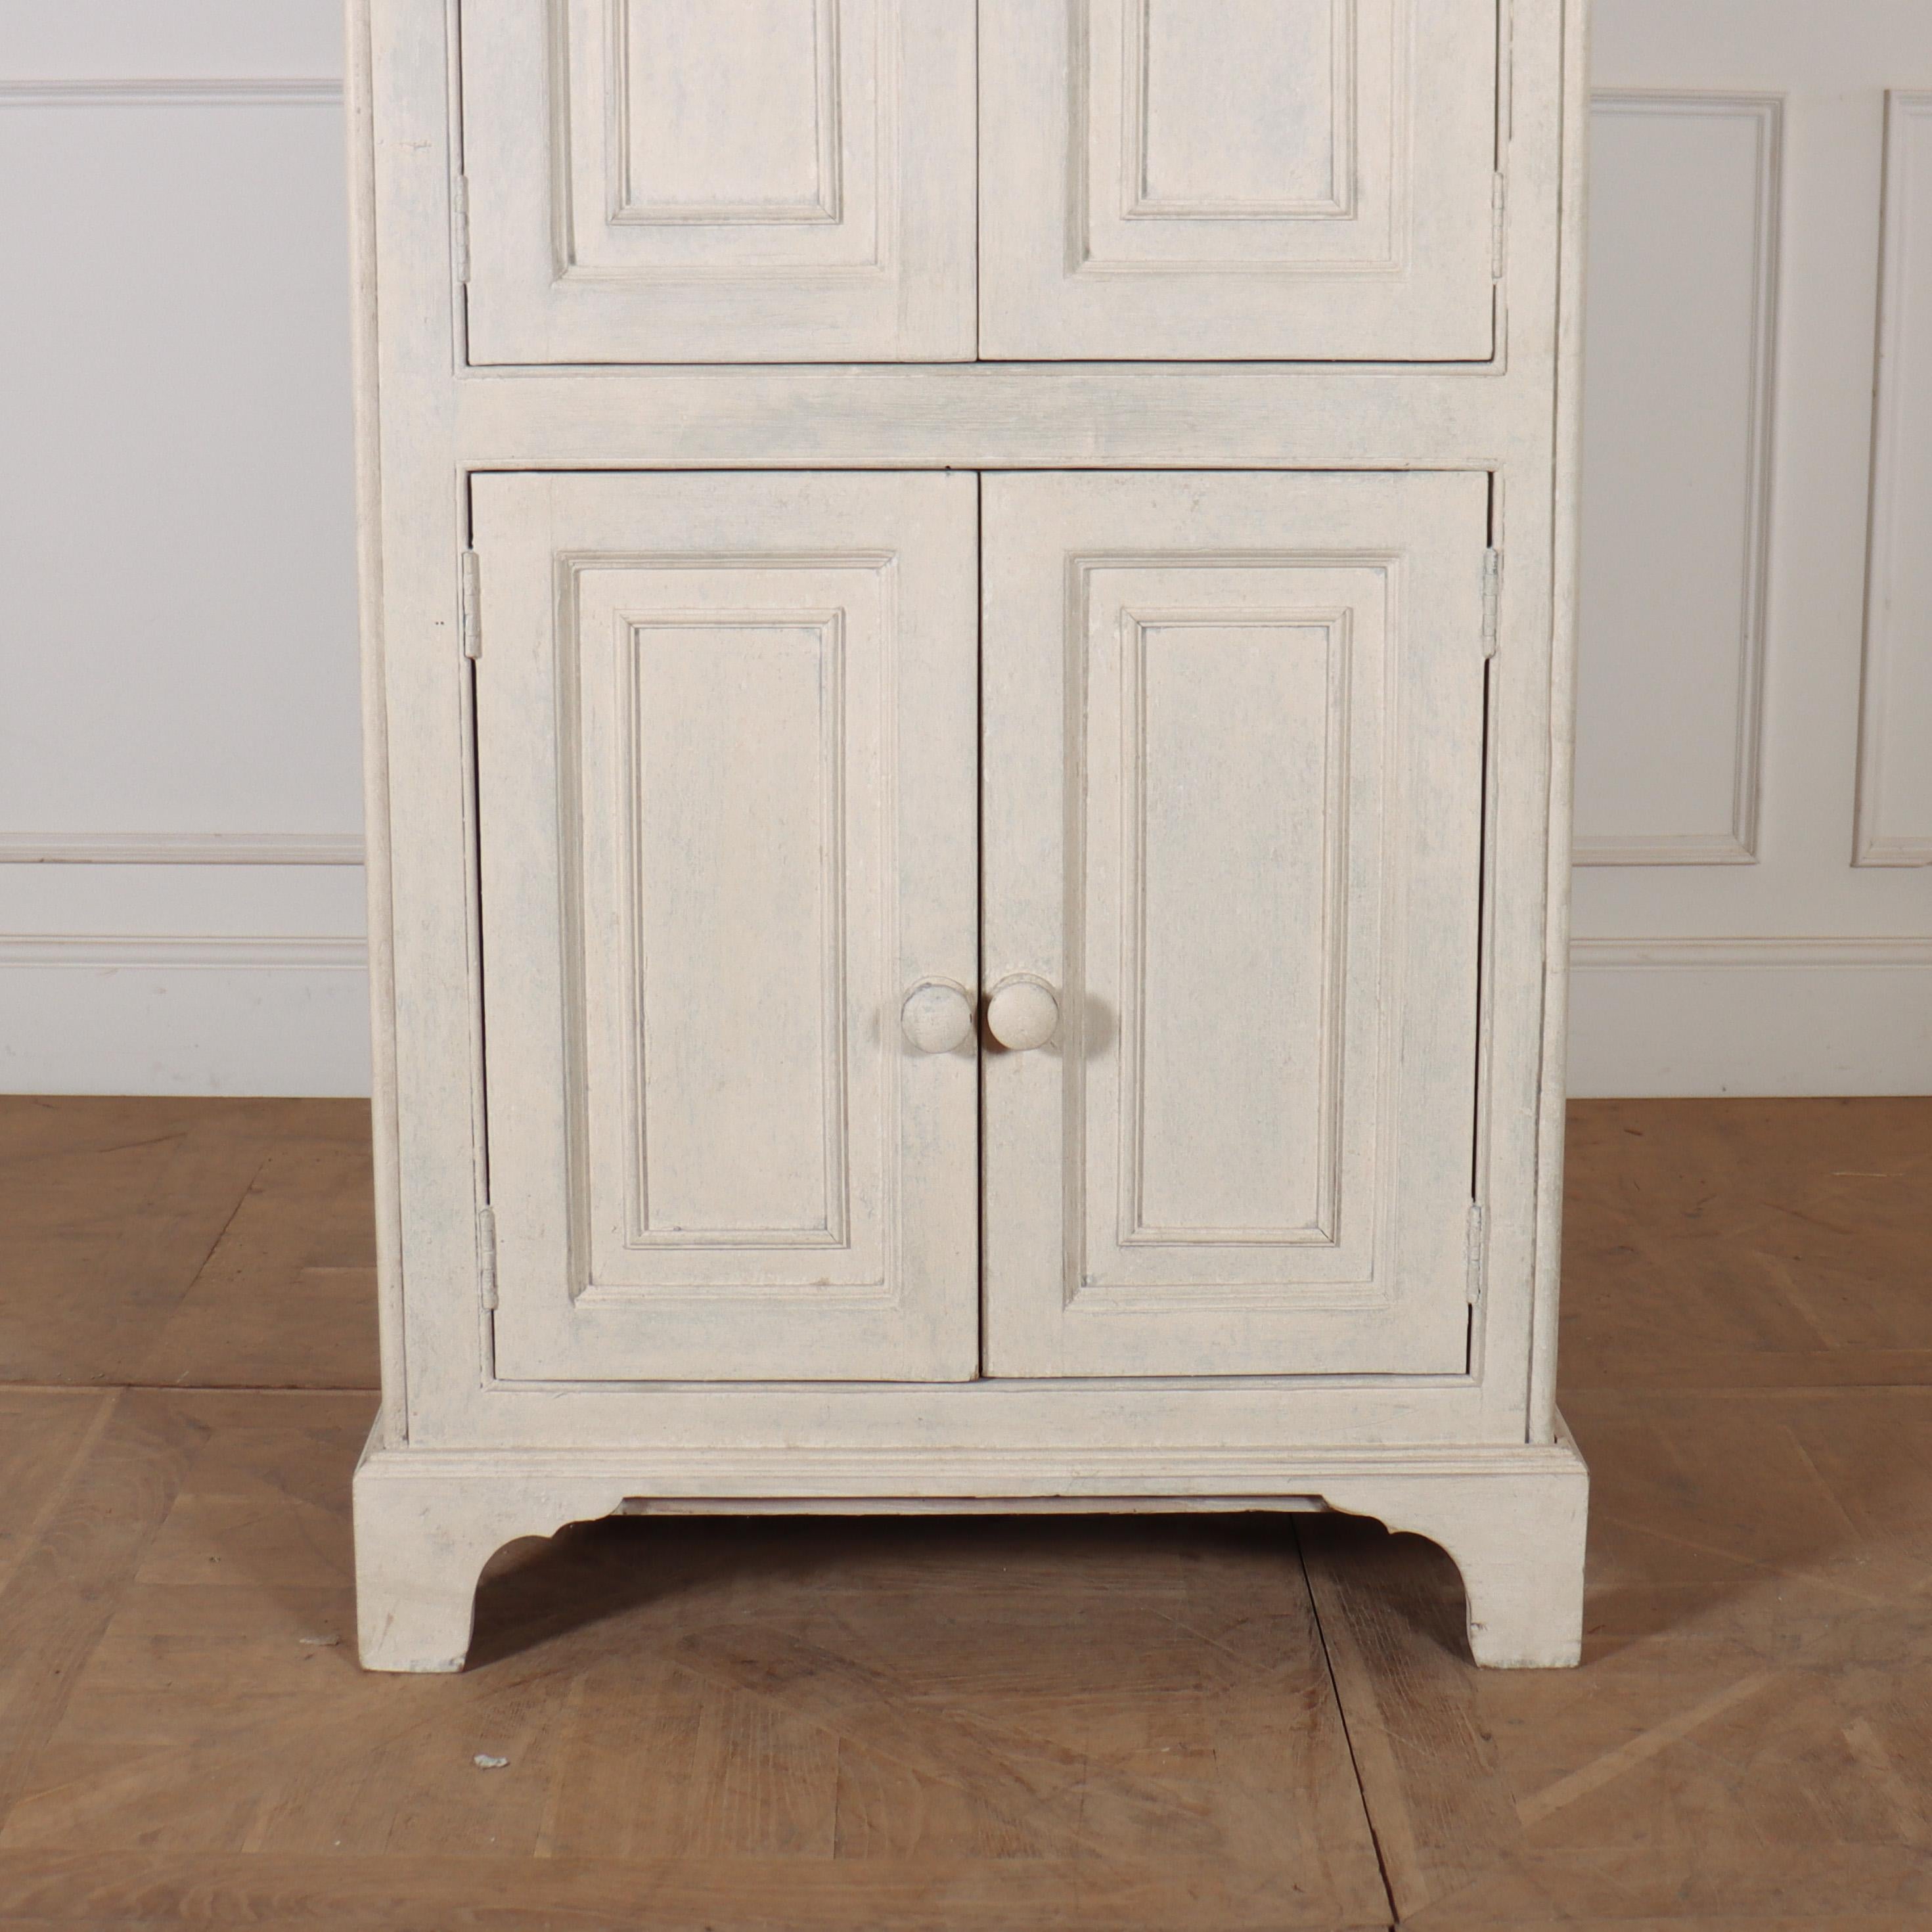 Painted Pine Linen Cupboard In Good Condition For Sale In Leamington Spa, Warwickshire